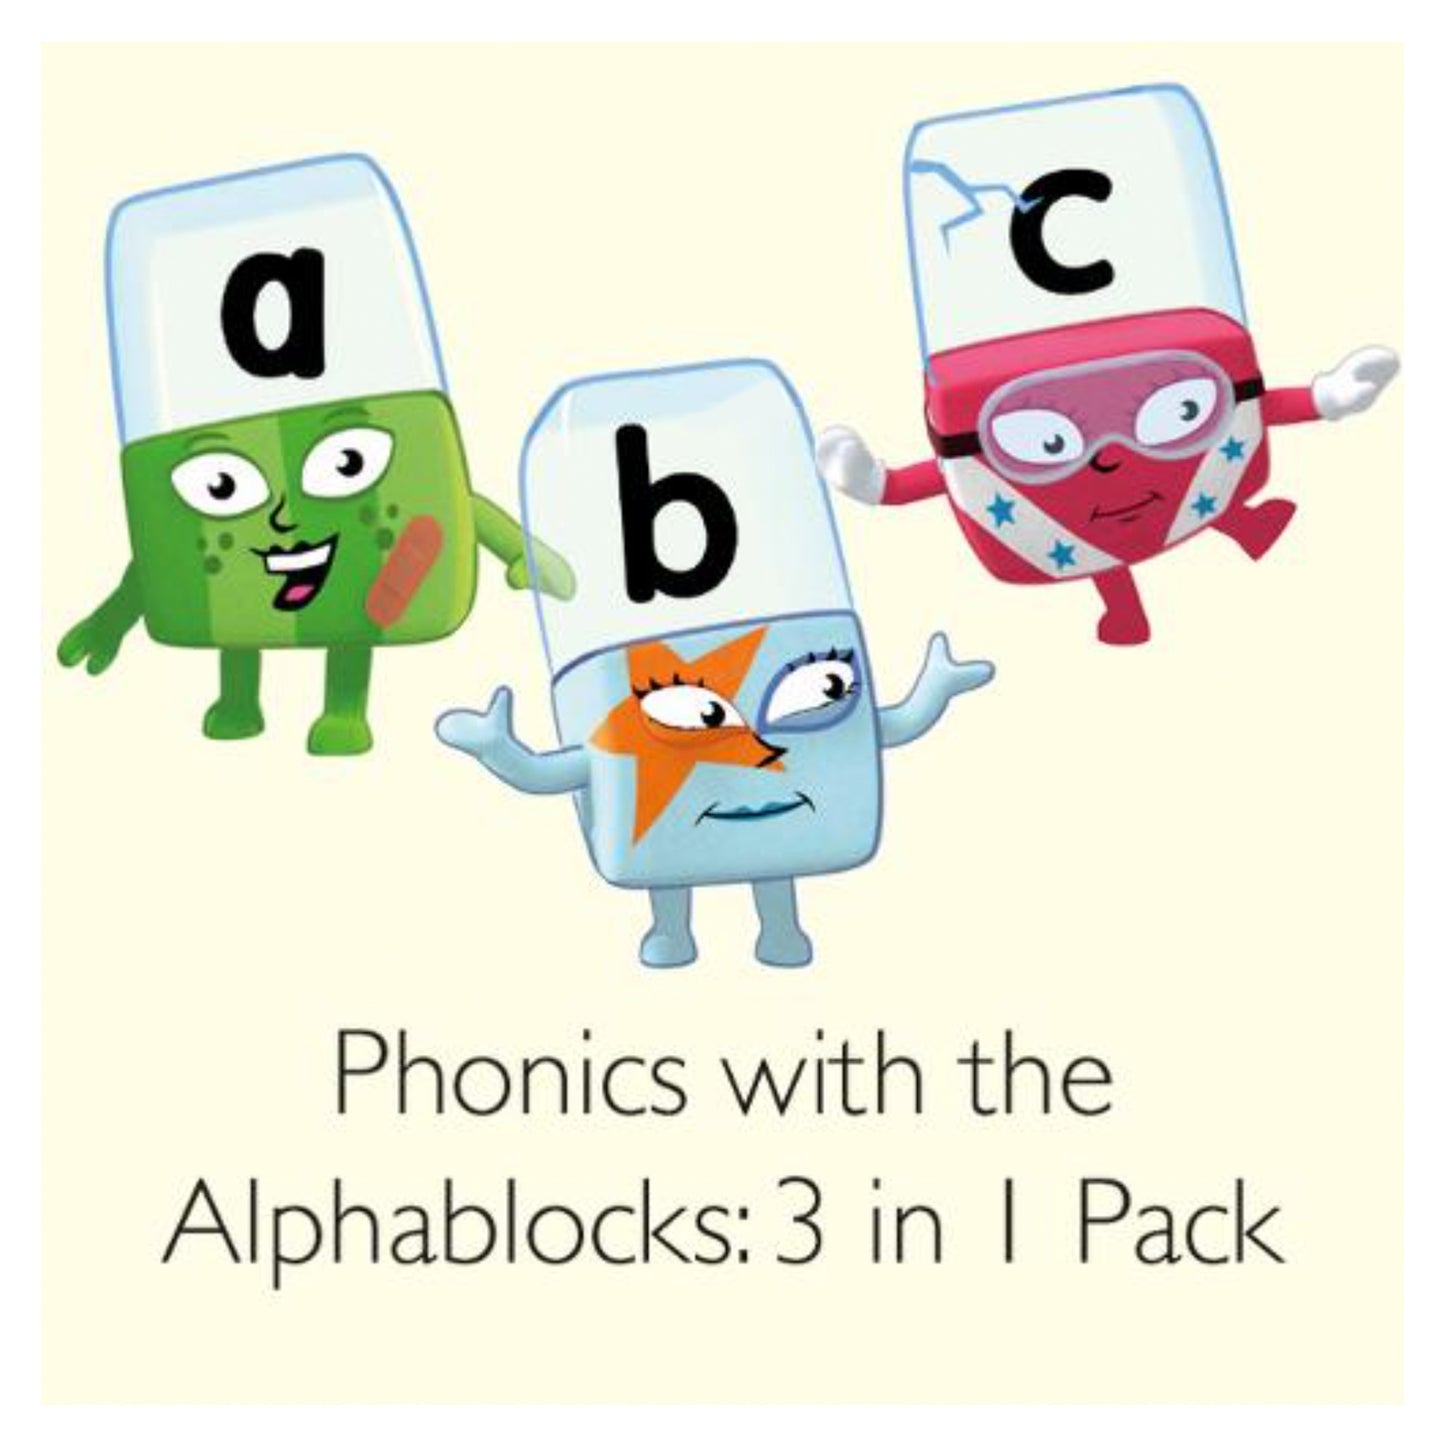 Phonics with the Alphablocks: 3 in 1 pack